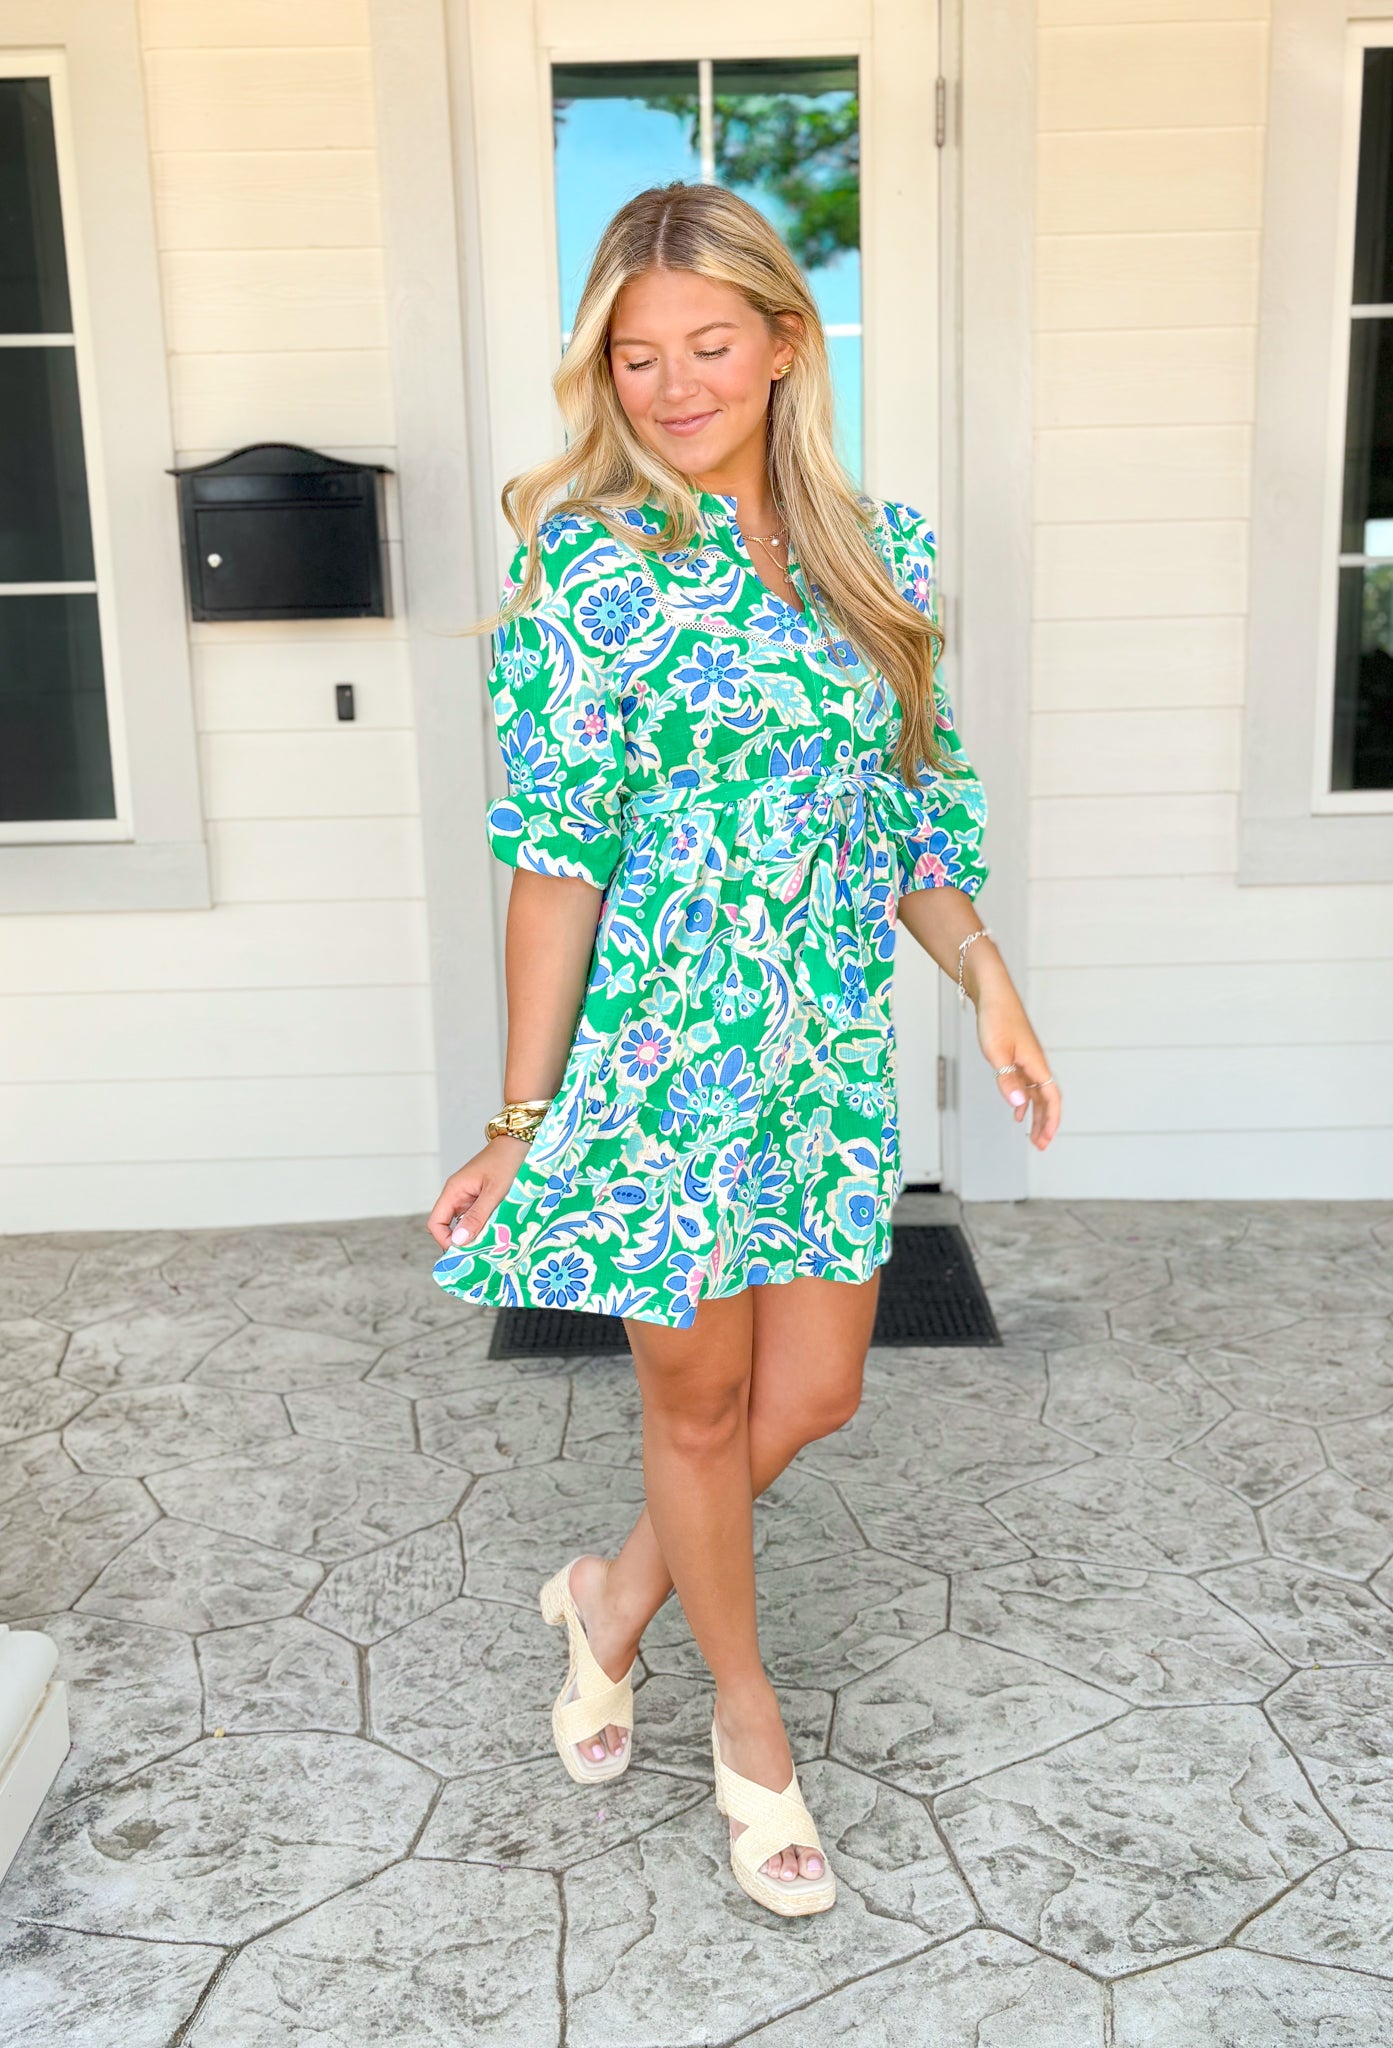 Breath Of Fresh Air Dress, kelly green quarter sleeve button down floral print dress with white lace details and cobalt blue and pink paisley floral design, tie belt around the waist 